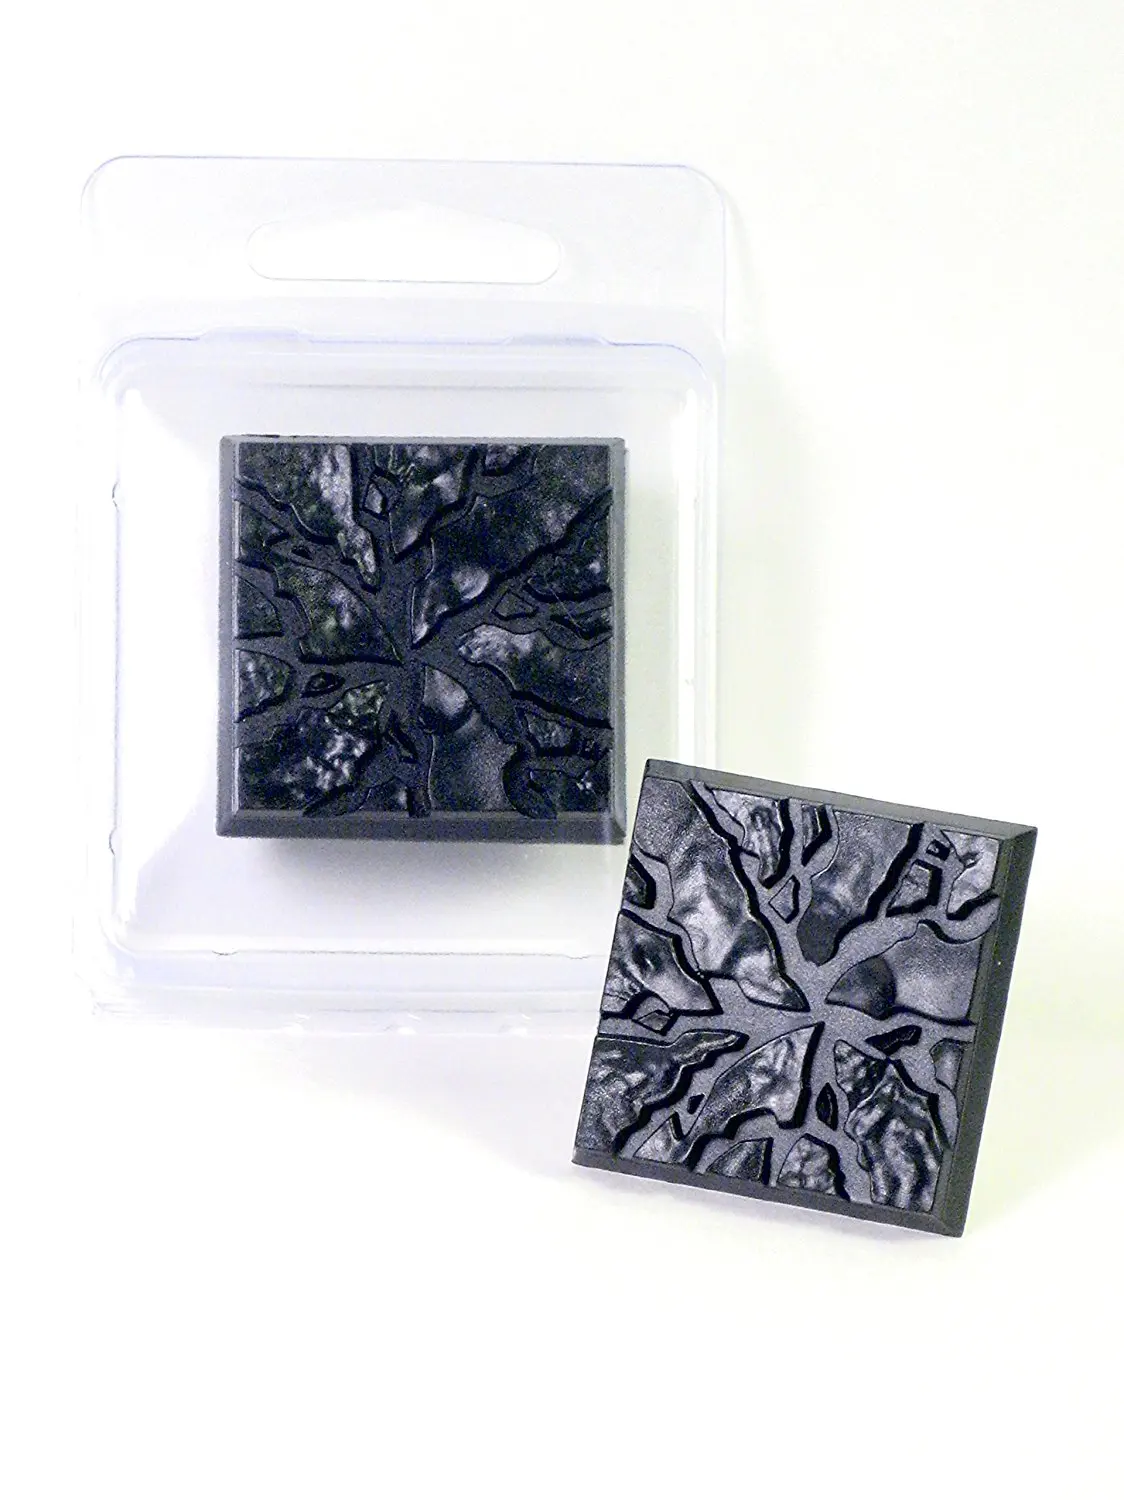 Value Pack of 10-50MM Round Black Miniature Model Bases for TableTop or Miniature WarGames 